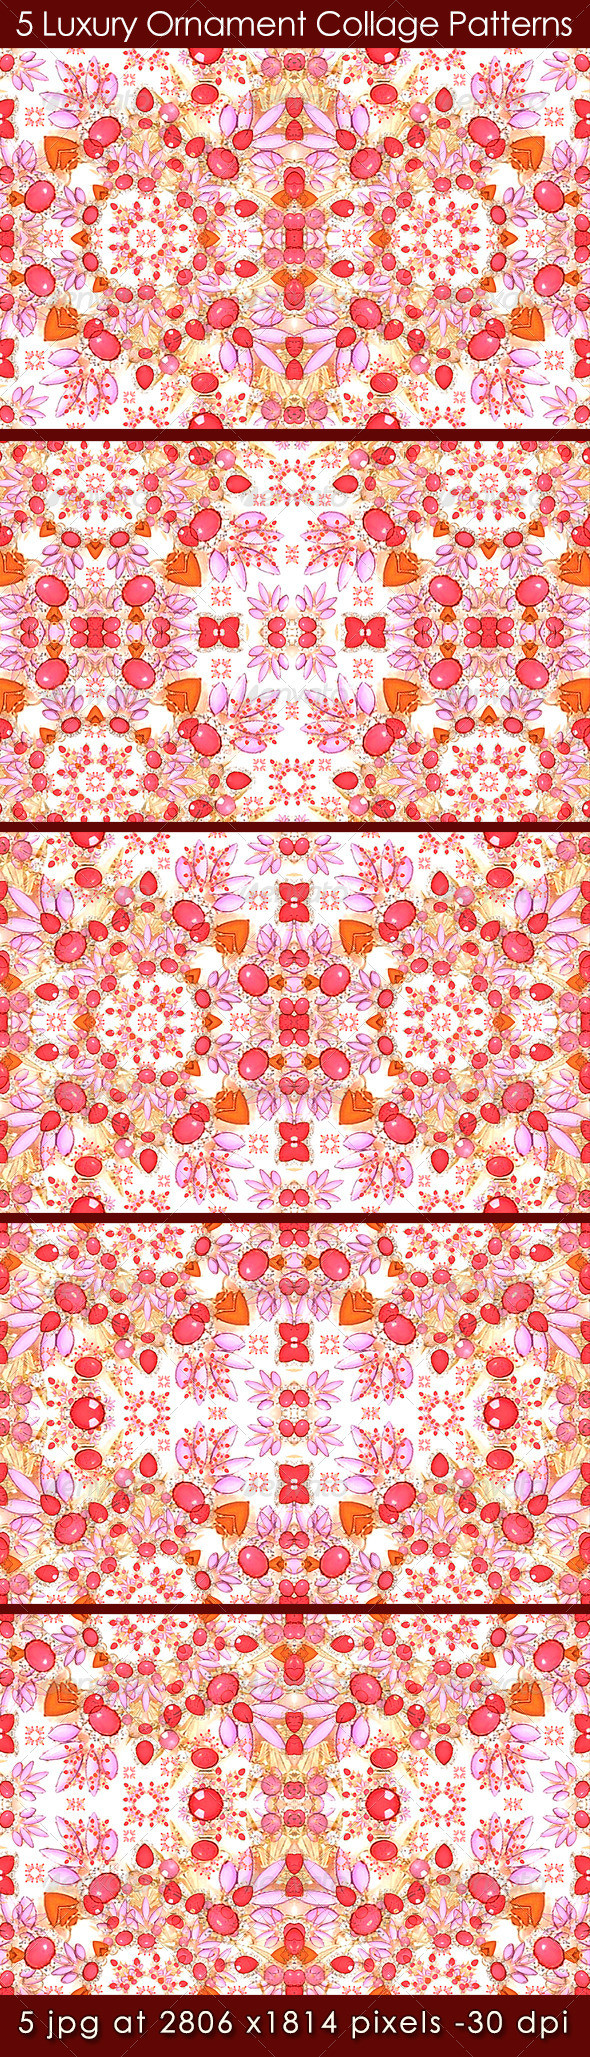 Preview 5 luxury ornament collage patterns